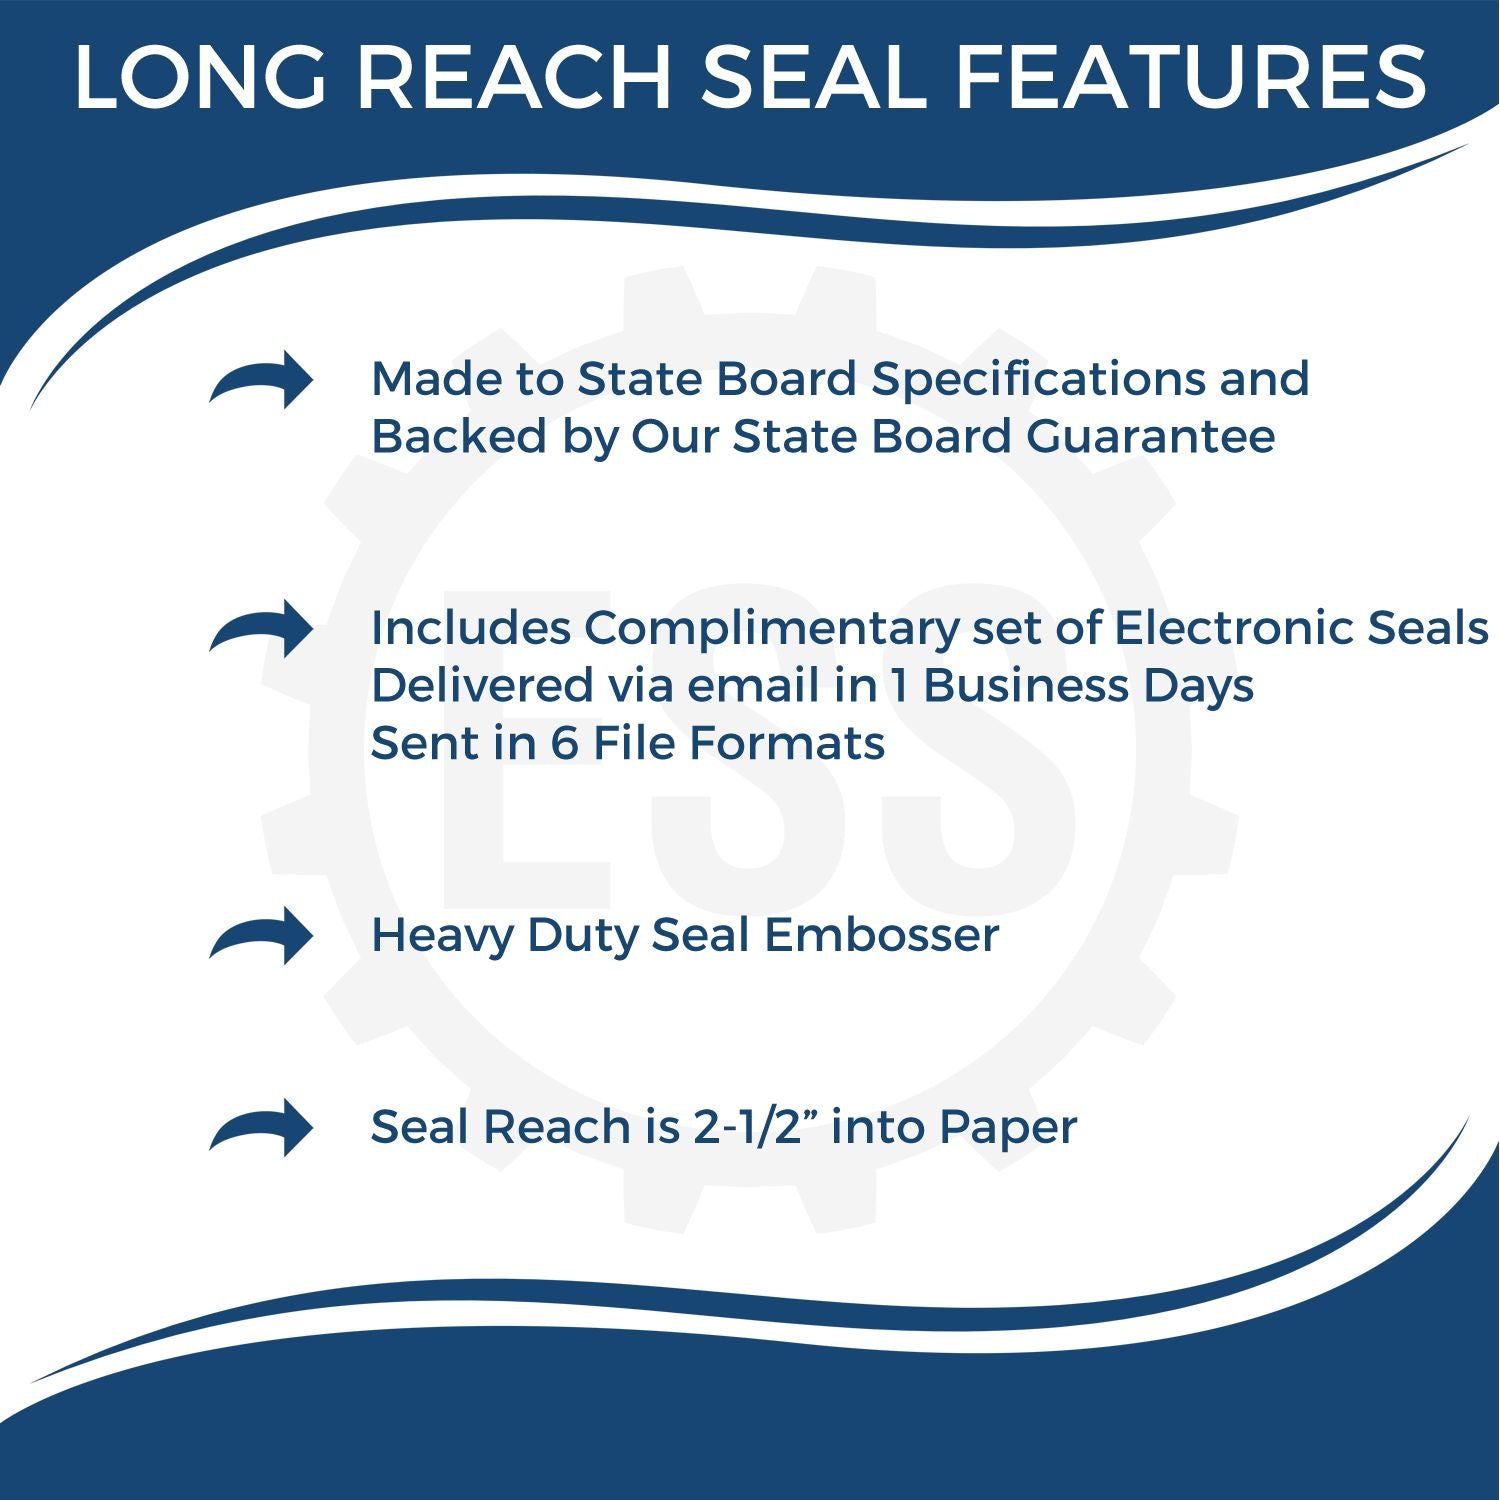 The main image for the Long Reach Washington PE Seal depicting a sample of the imprint and electronic files